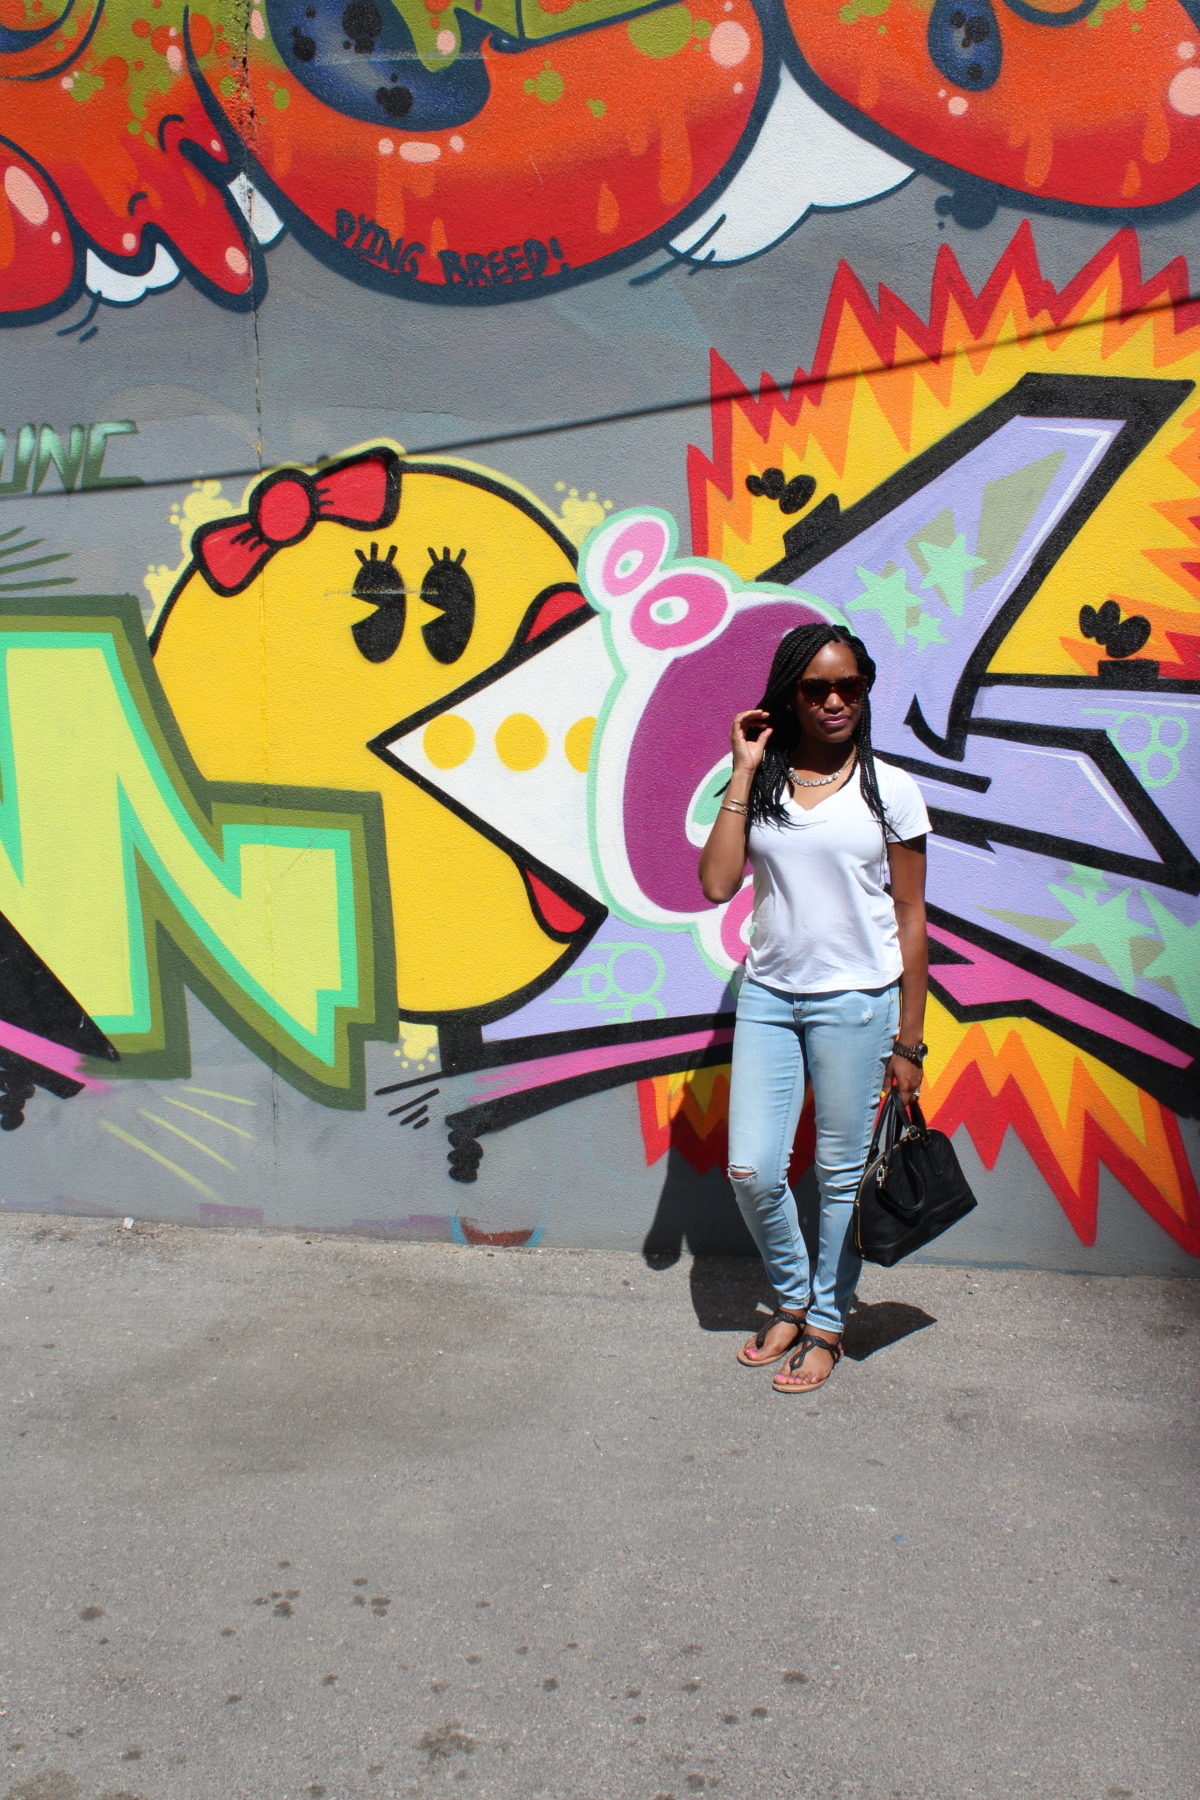 Toronto has lots of colorful graffiti that catches the eye when walking down the street.